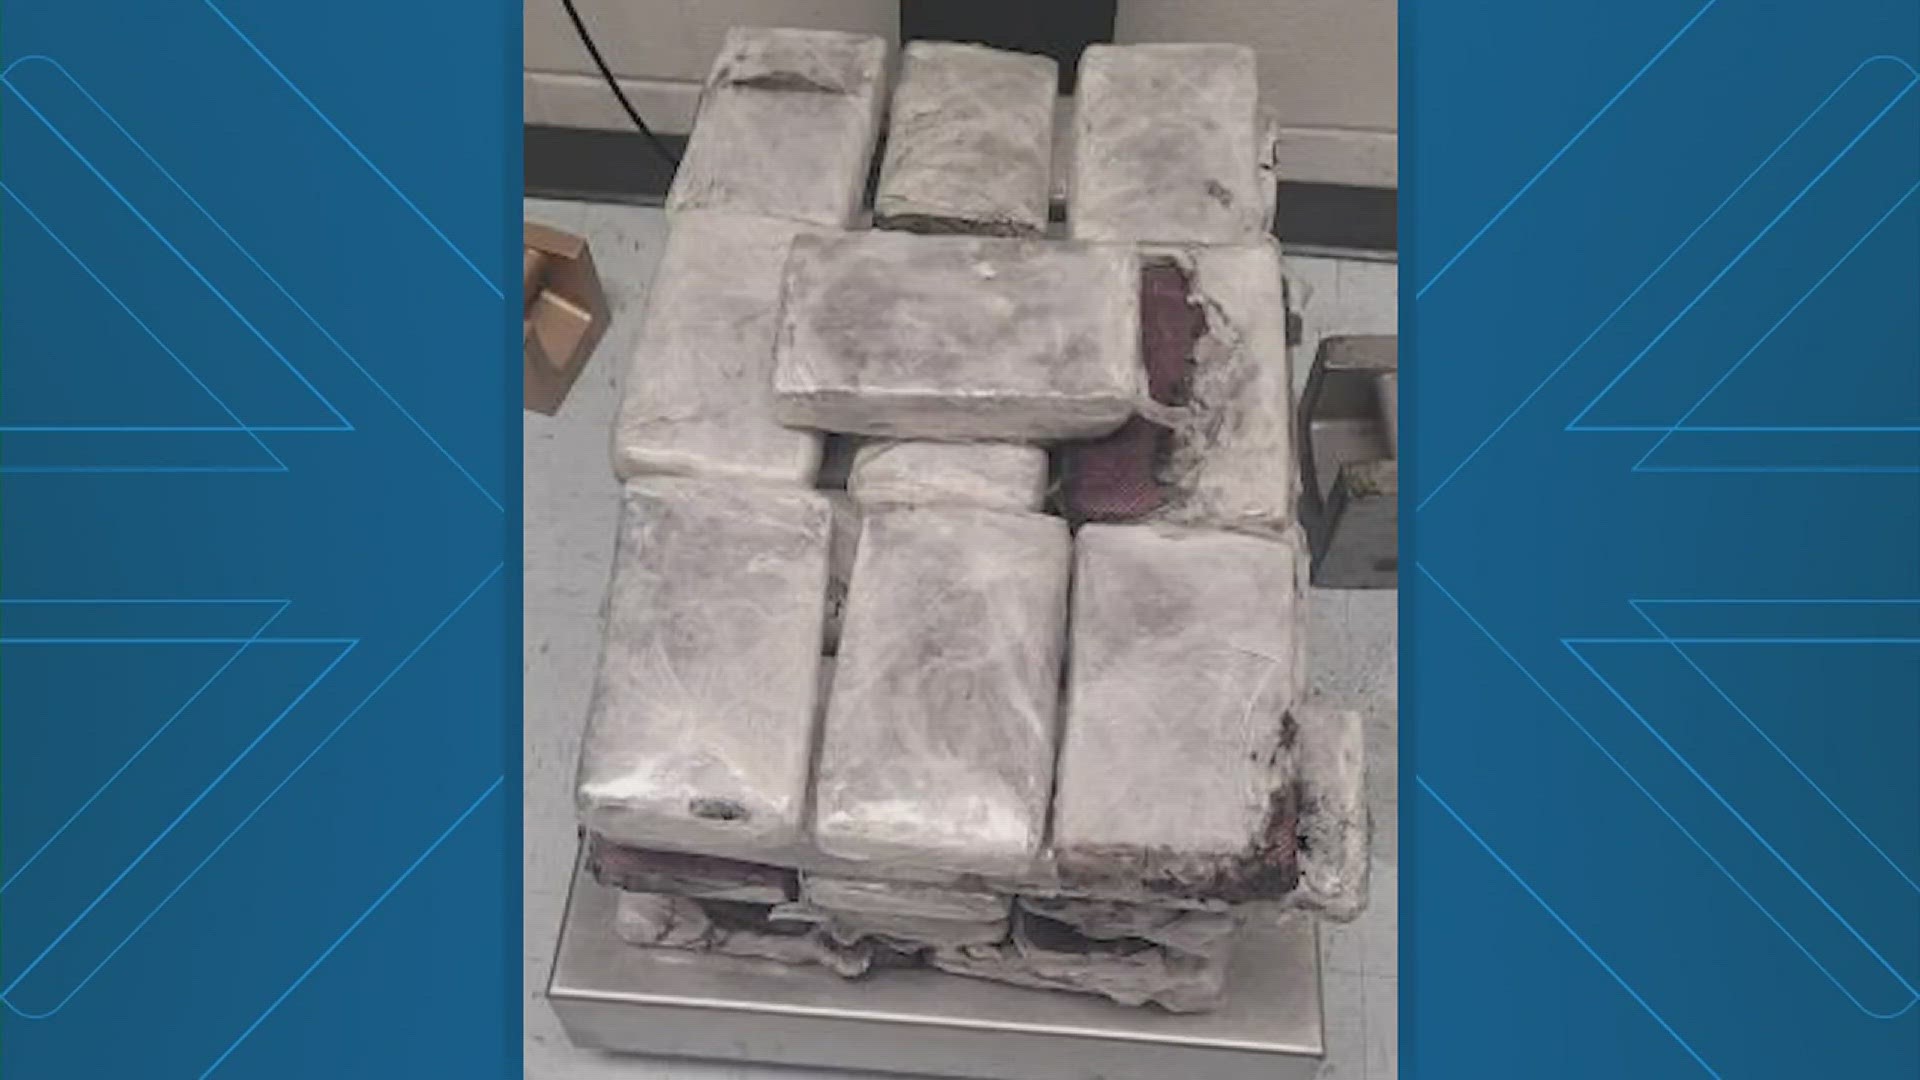 The cocaine was found in the walls of a commercial ice cream maker at a cargo facility.